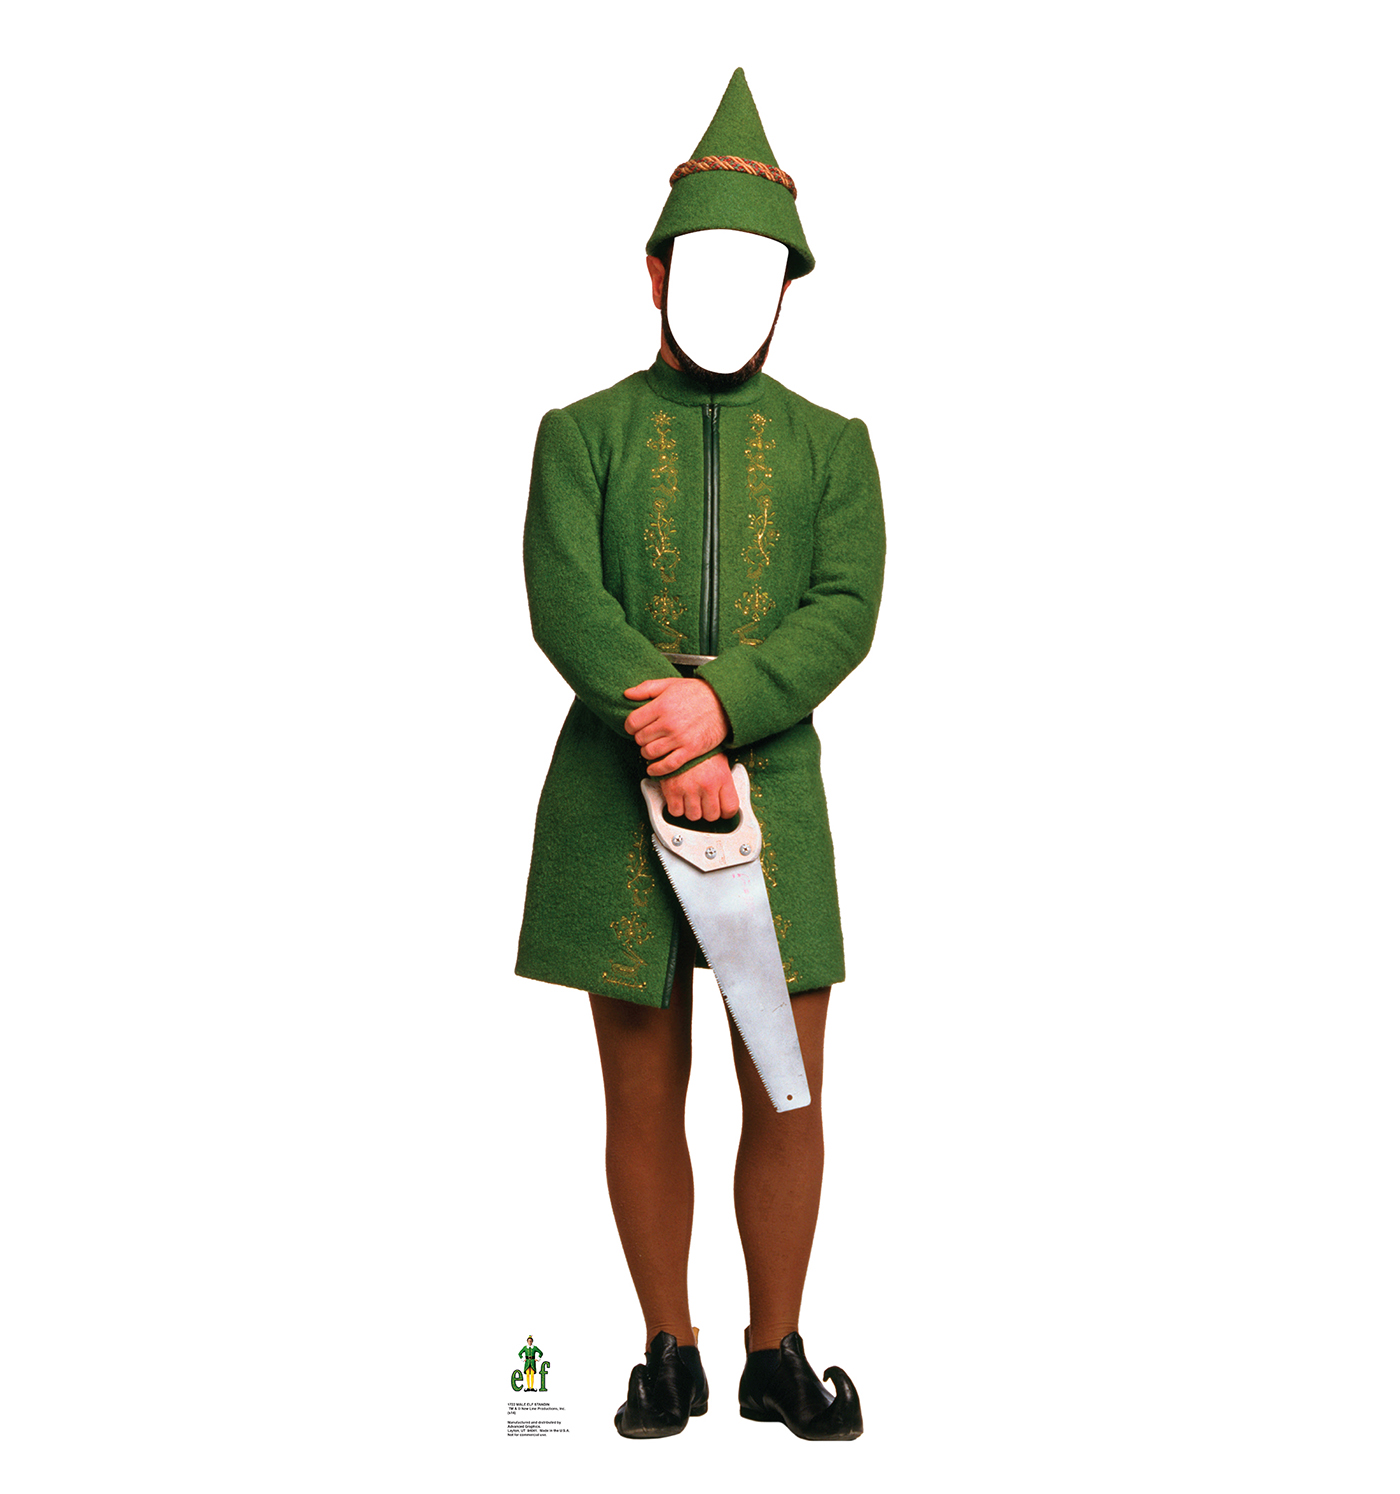 Life Size Free Standing Cardboard Cutout Of A Male Elf Face Is Open Allowing For Fun Photos